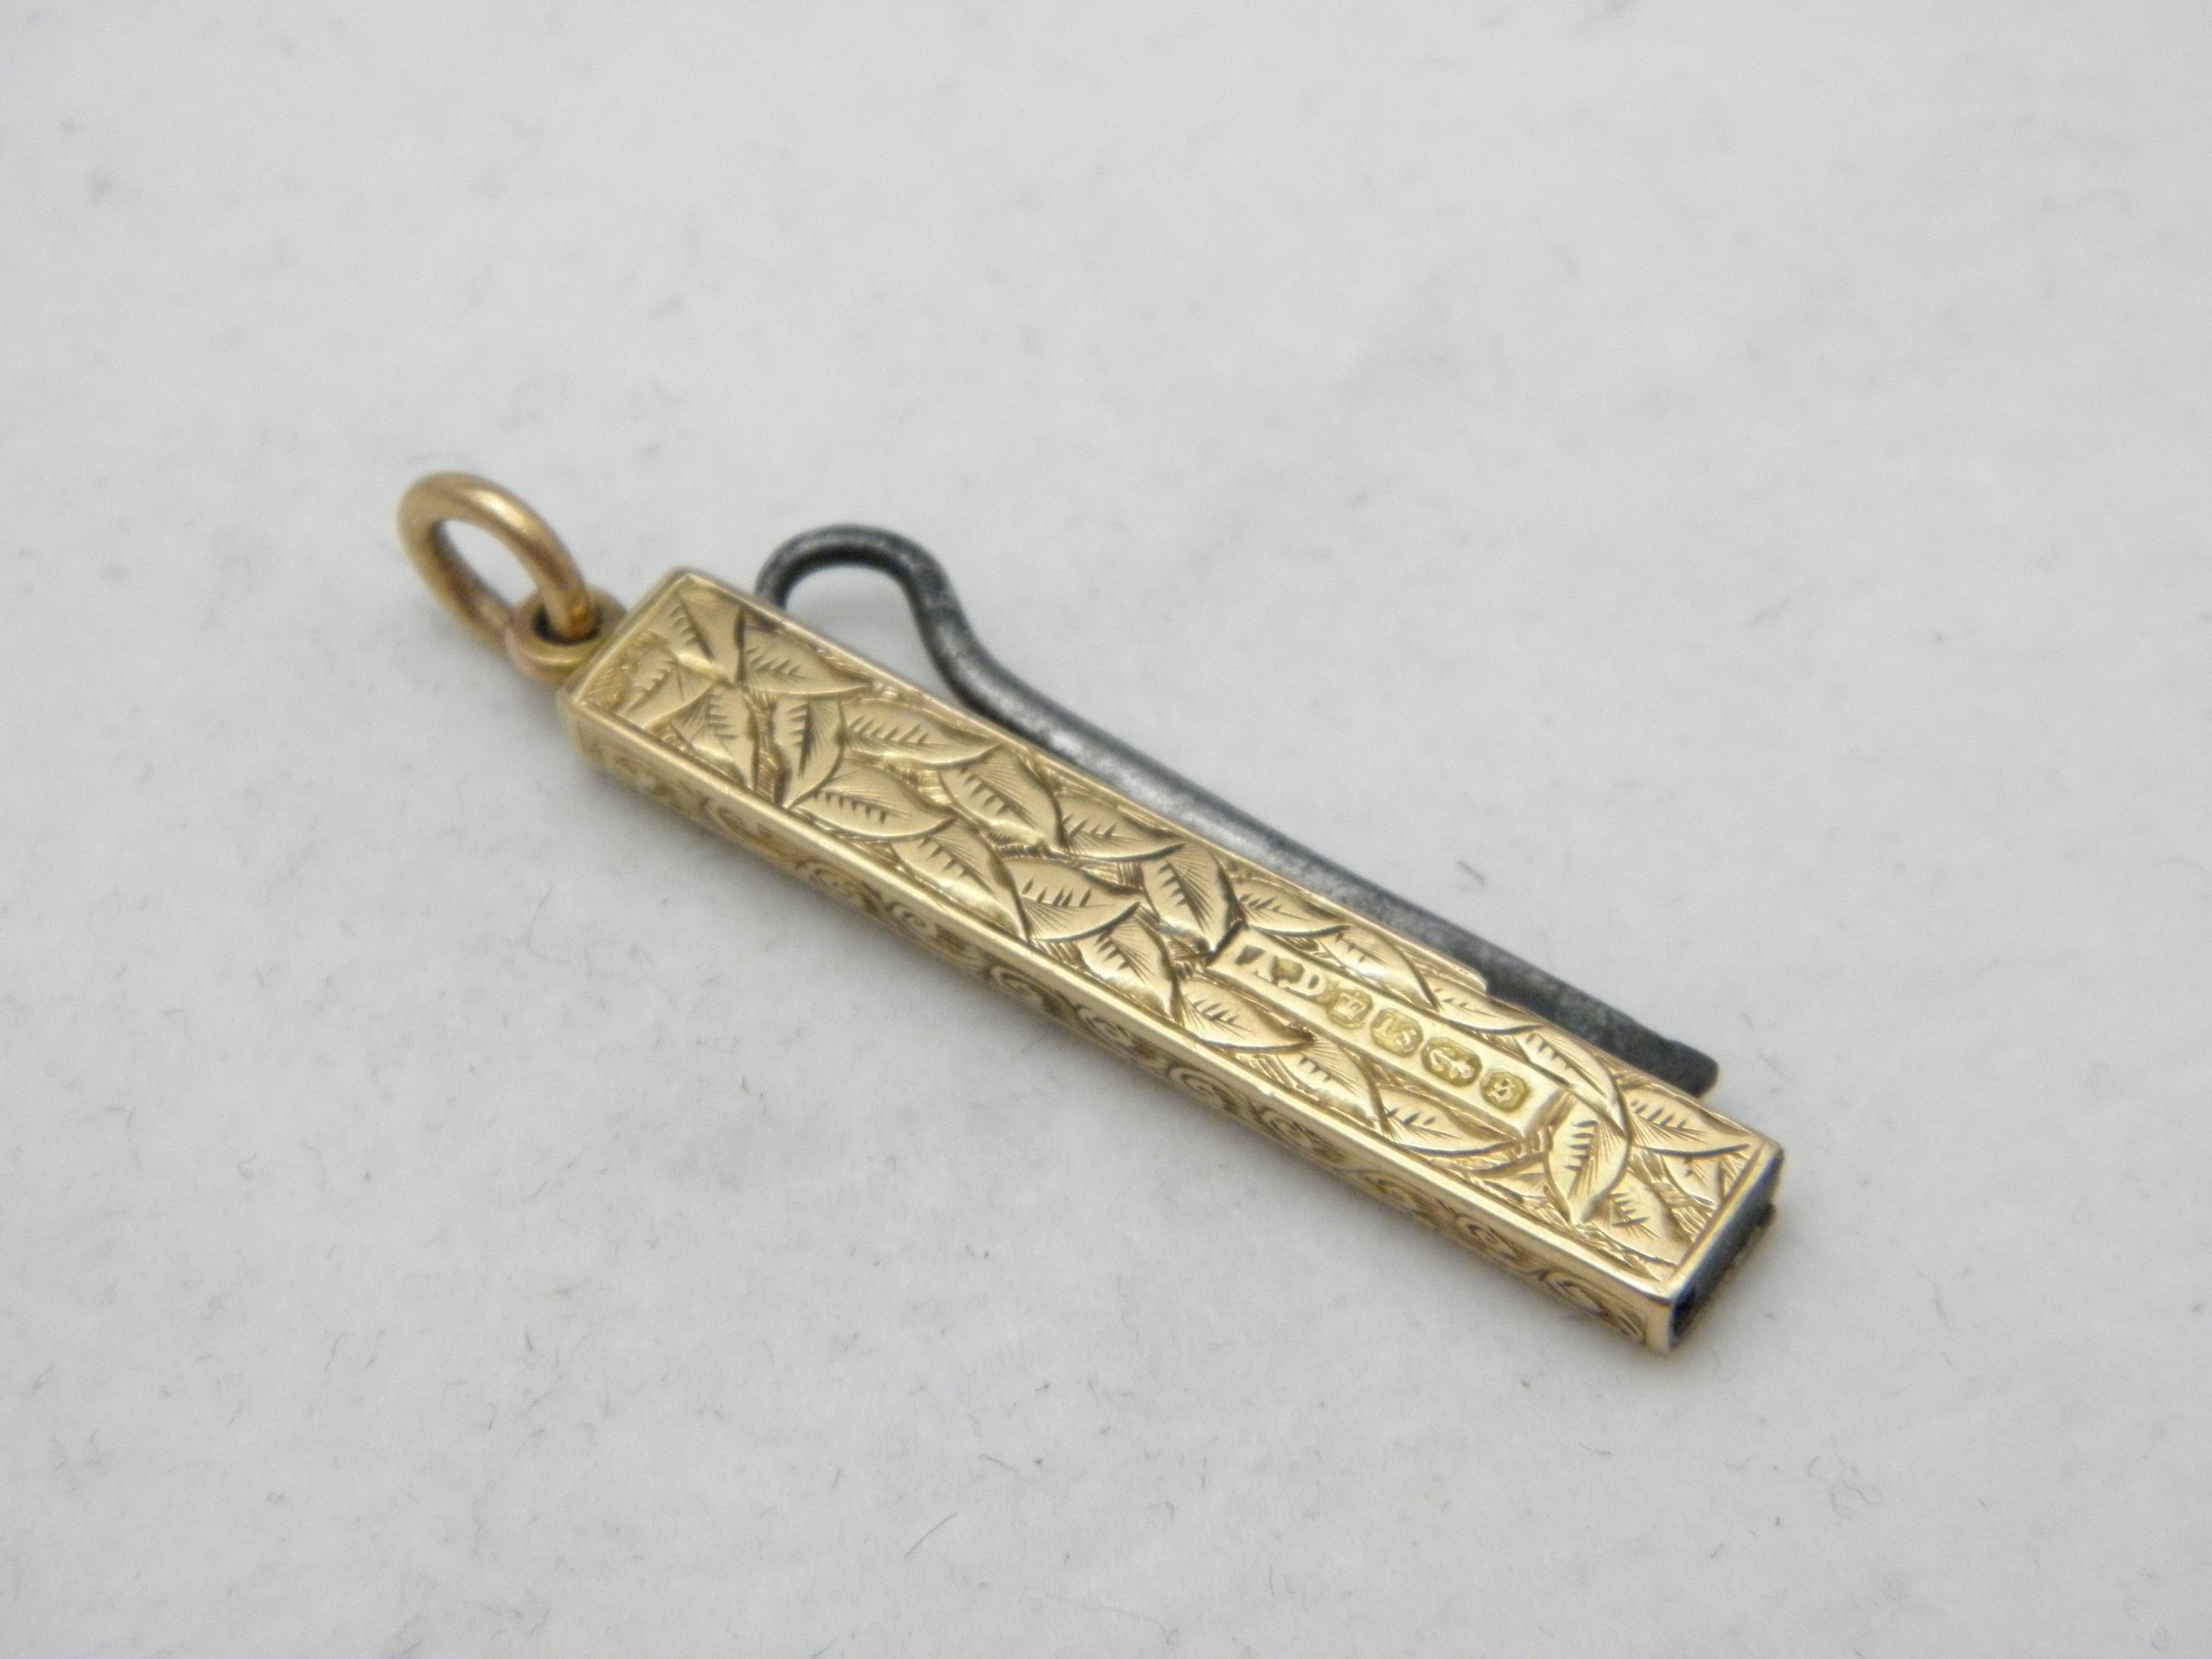 If you have landed on this page then you have an eye for beauty.

On offer is this gorgeous

18CT SOLID GOLD BUTTON HOOK FOB / PENDANT / CHATELAINE

DETAILS
Material: 18ct (750/000) Solid Rosey Yellow Gold with Steel hook
Style: Highly detailed